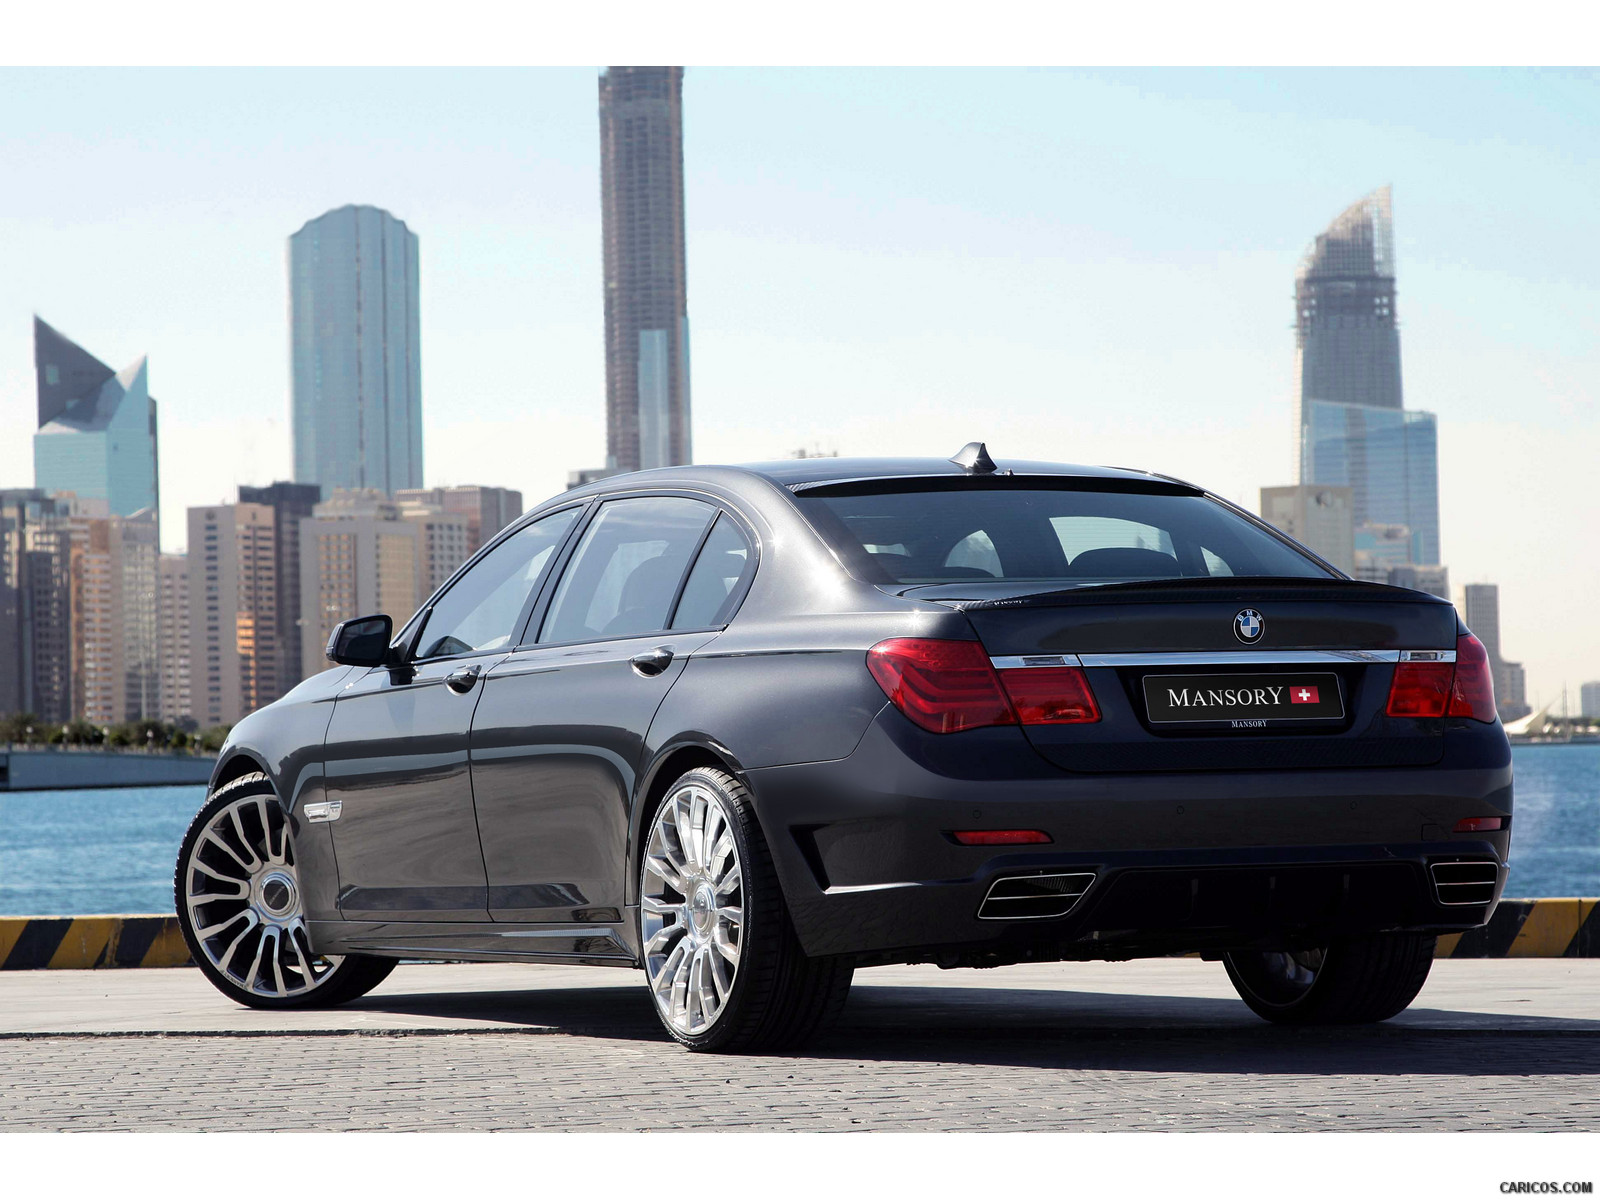 Mansory BMW 7-Series  - Rear, #4 of 6